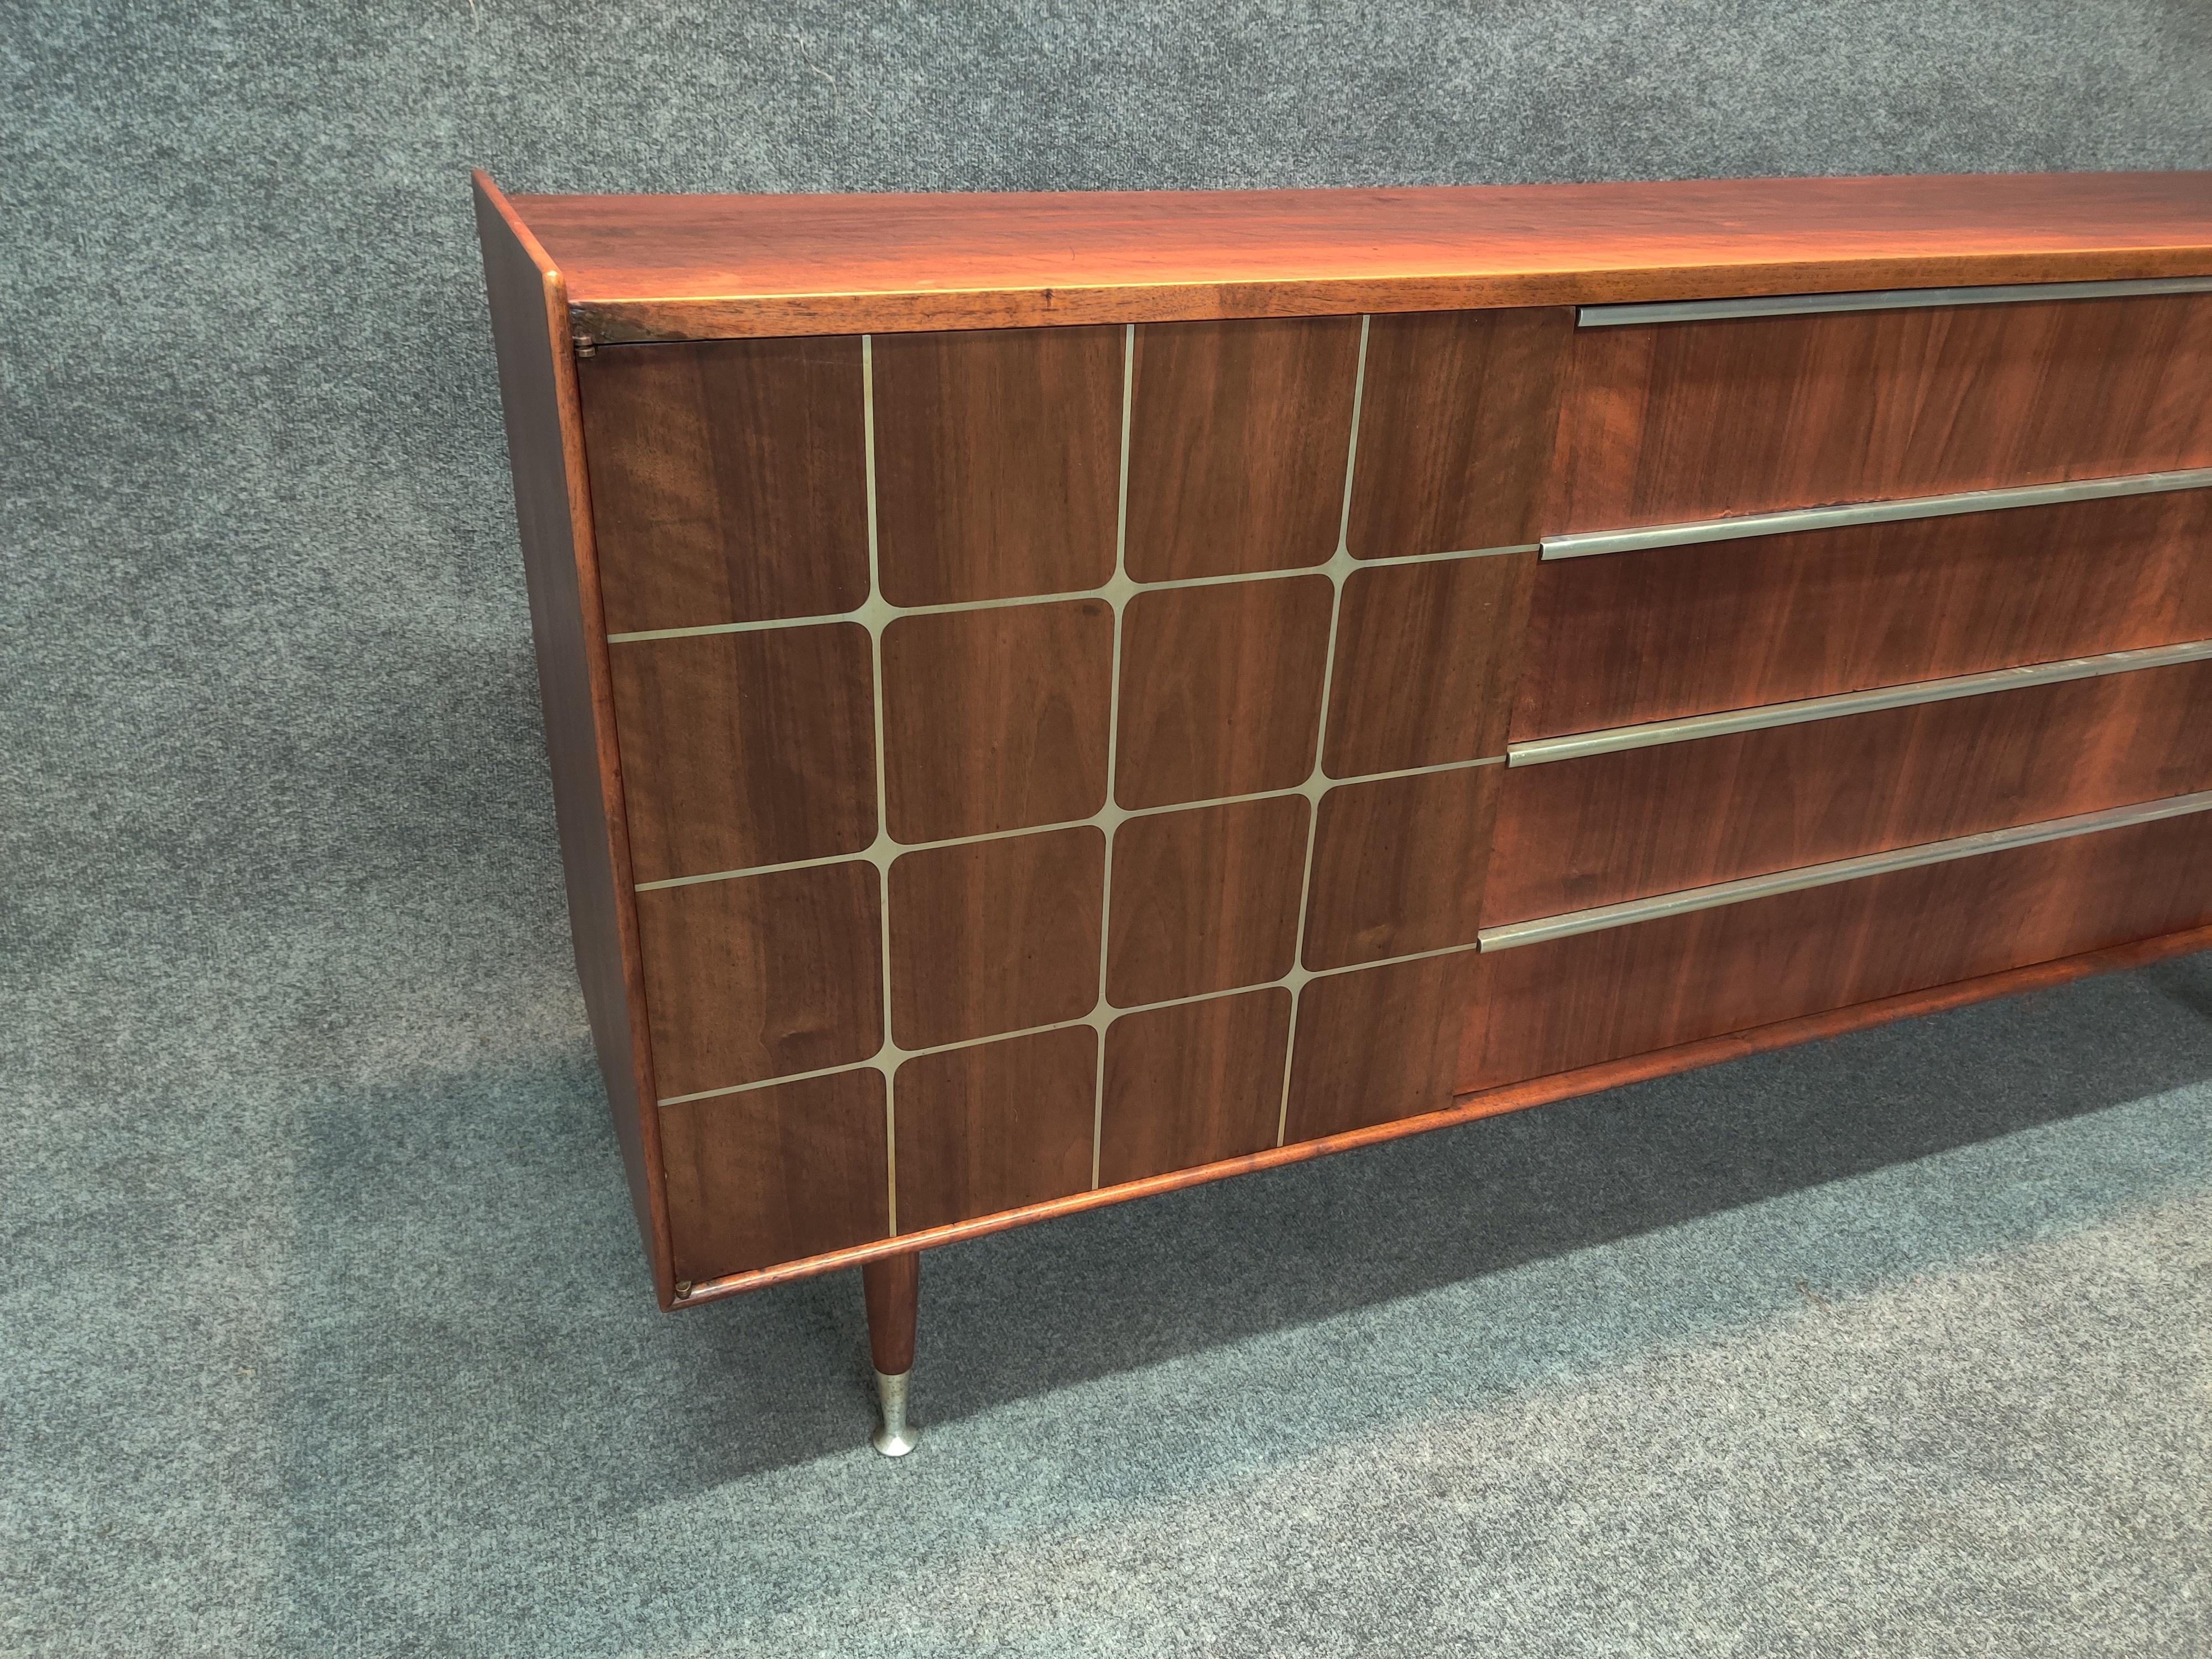 A stunning vintage sideboard, featuring a warm rubbed satin finish on book-matched walnut graining, slender aluminum handles and inlaid aluminum decorative grid. Tapered legs are quintessential in designer Edmond Spence's storage series. With style